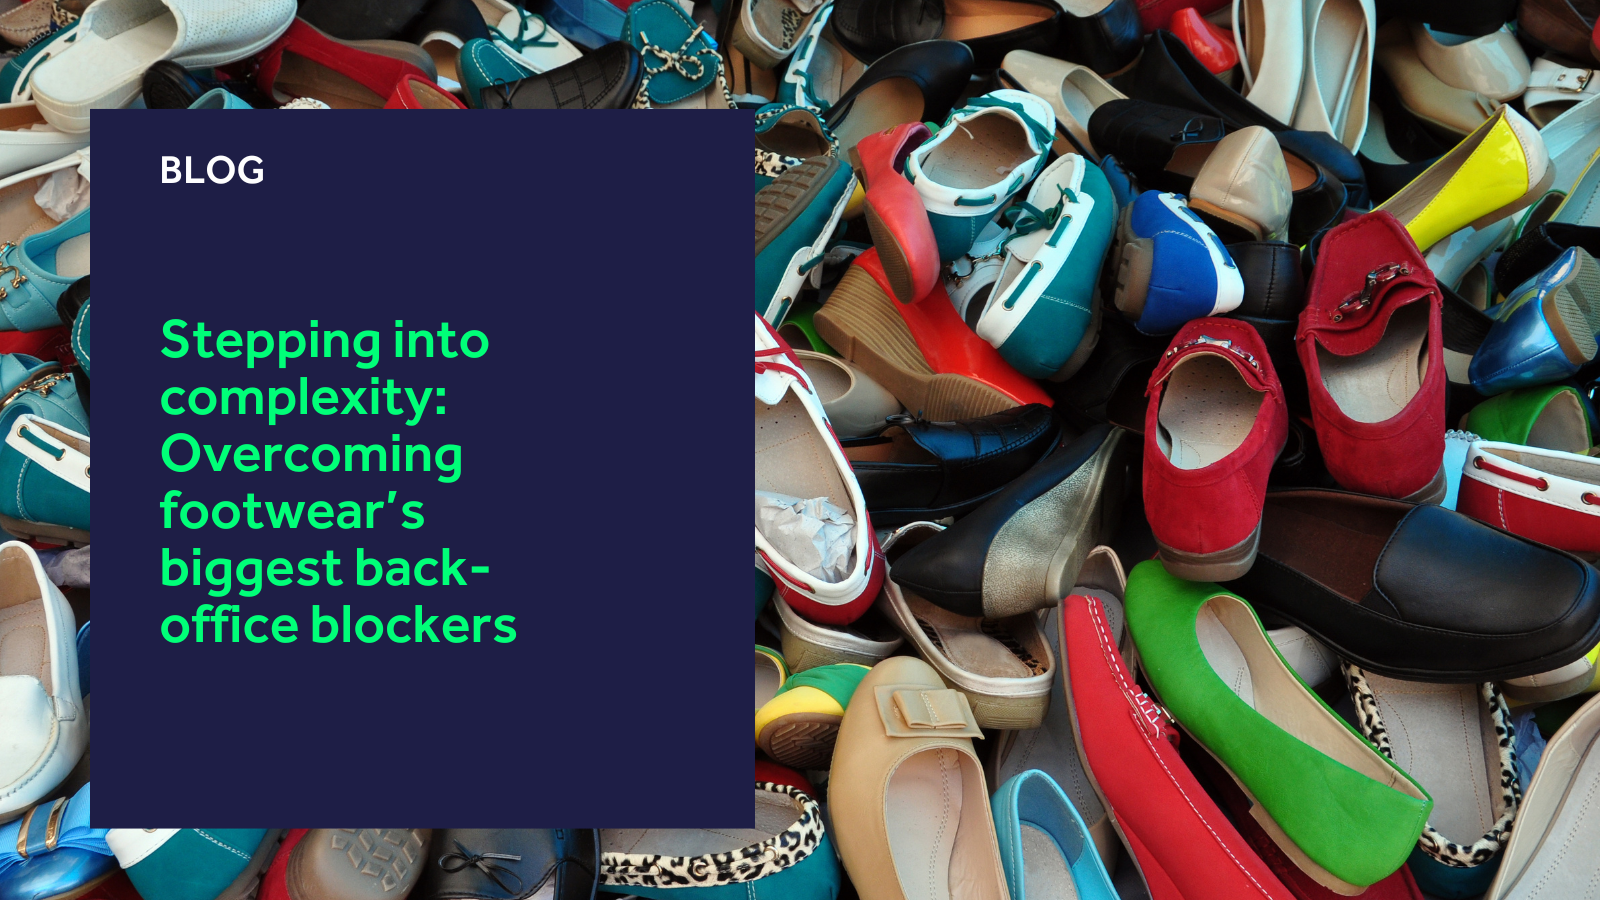 Stepping into complexity: Overcoming footwear’s biggest back-office blockers blog header